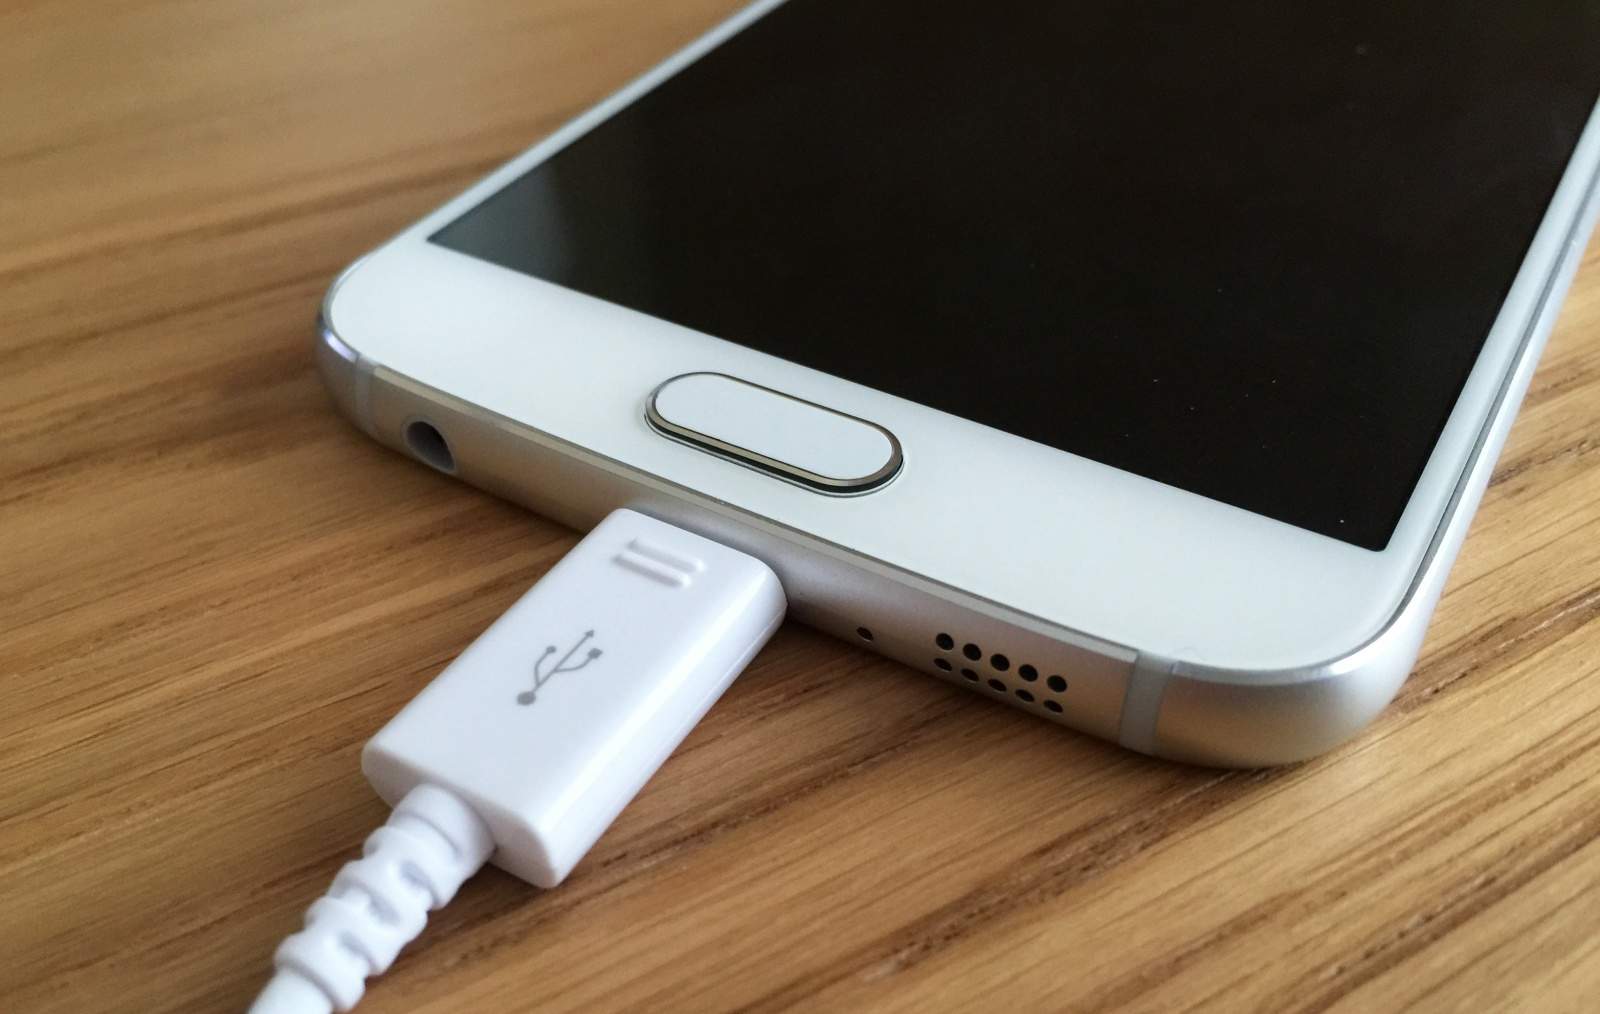 using-your-phone-while-it-charges-can-kill-you-image-cultofandroidcomwp-contentuploads201504Galaxy-S6-charging-jpg